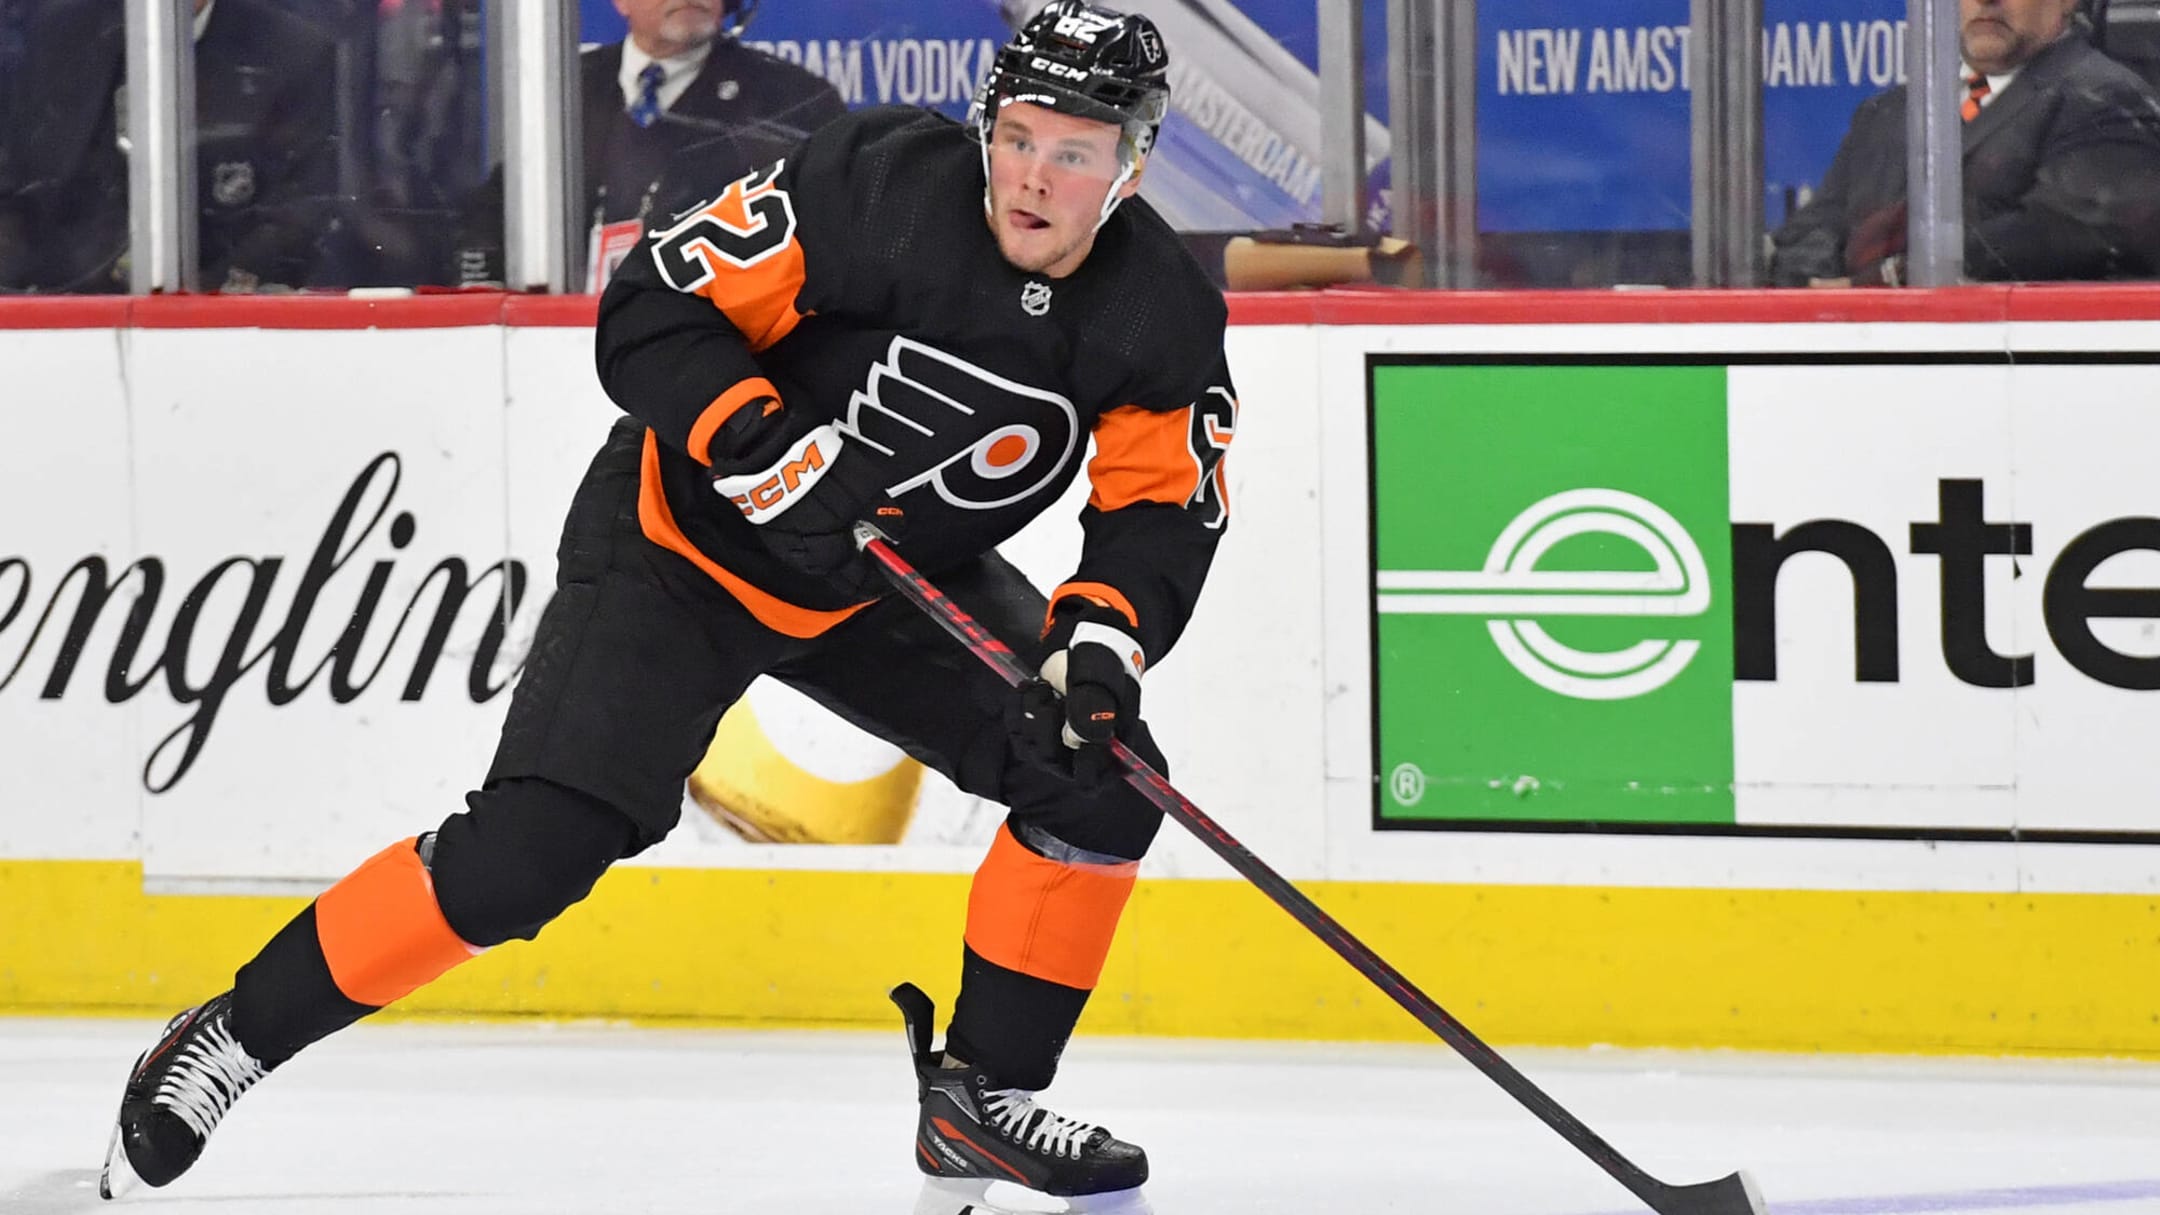 Flyers' Morgan Frost agrees to two-year contract - The Hockey News